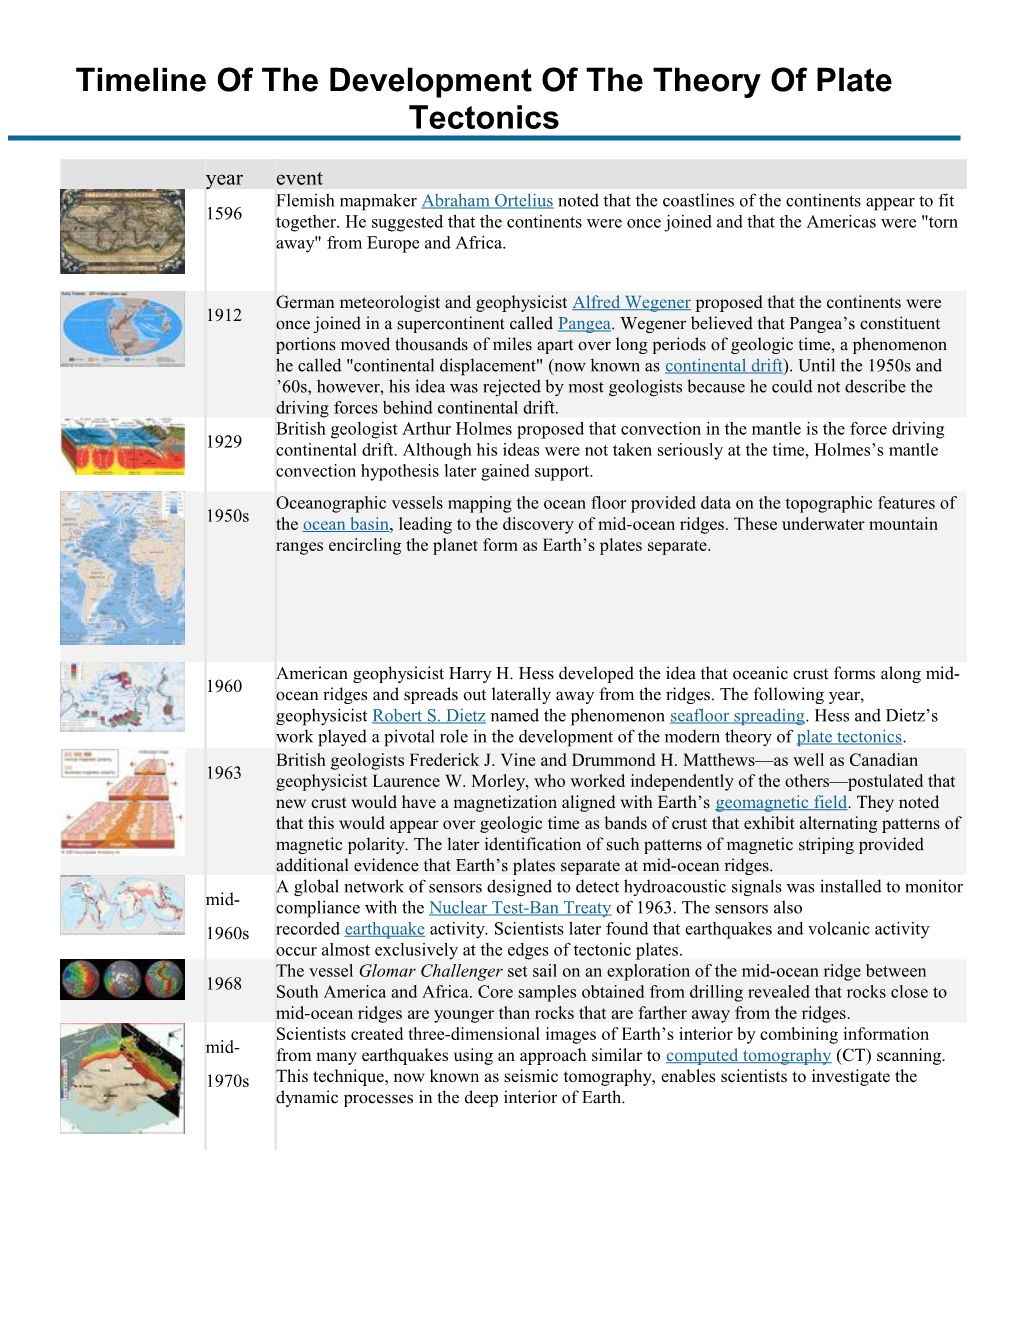 Timeline of the Development of the Theory of Plate Tectonics